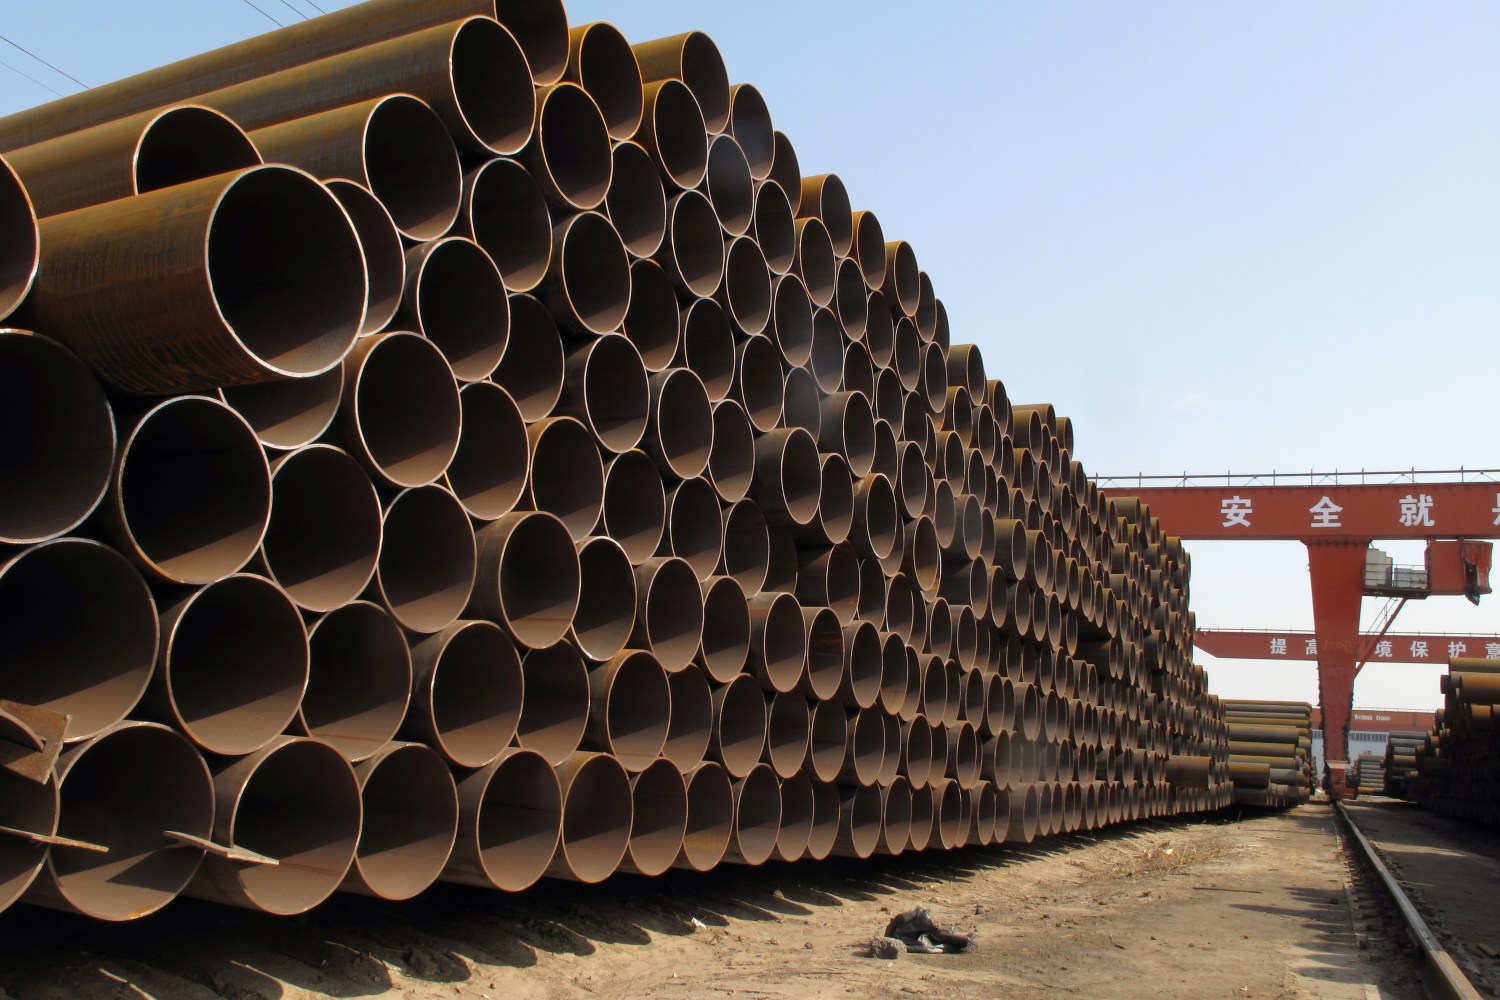 Steel pipes waiting to be loaded and transferred to the port are seen at a steel mill in Cangzhou, Hebei province, China March 19, 2018. Picture taken March 19, 2018. REUTERS/Muyu Xu - RC1CB23F00A0